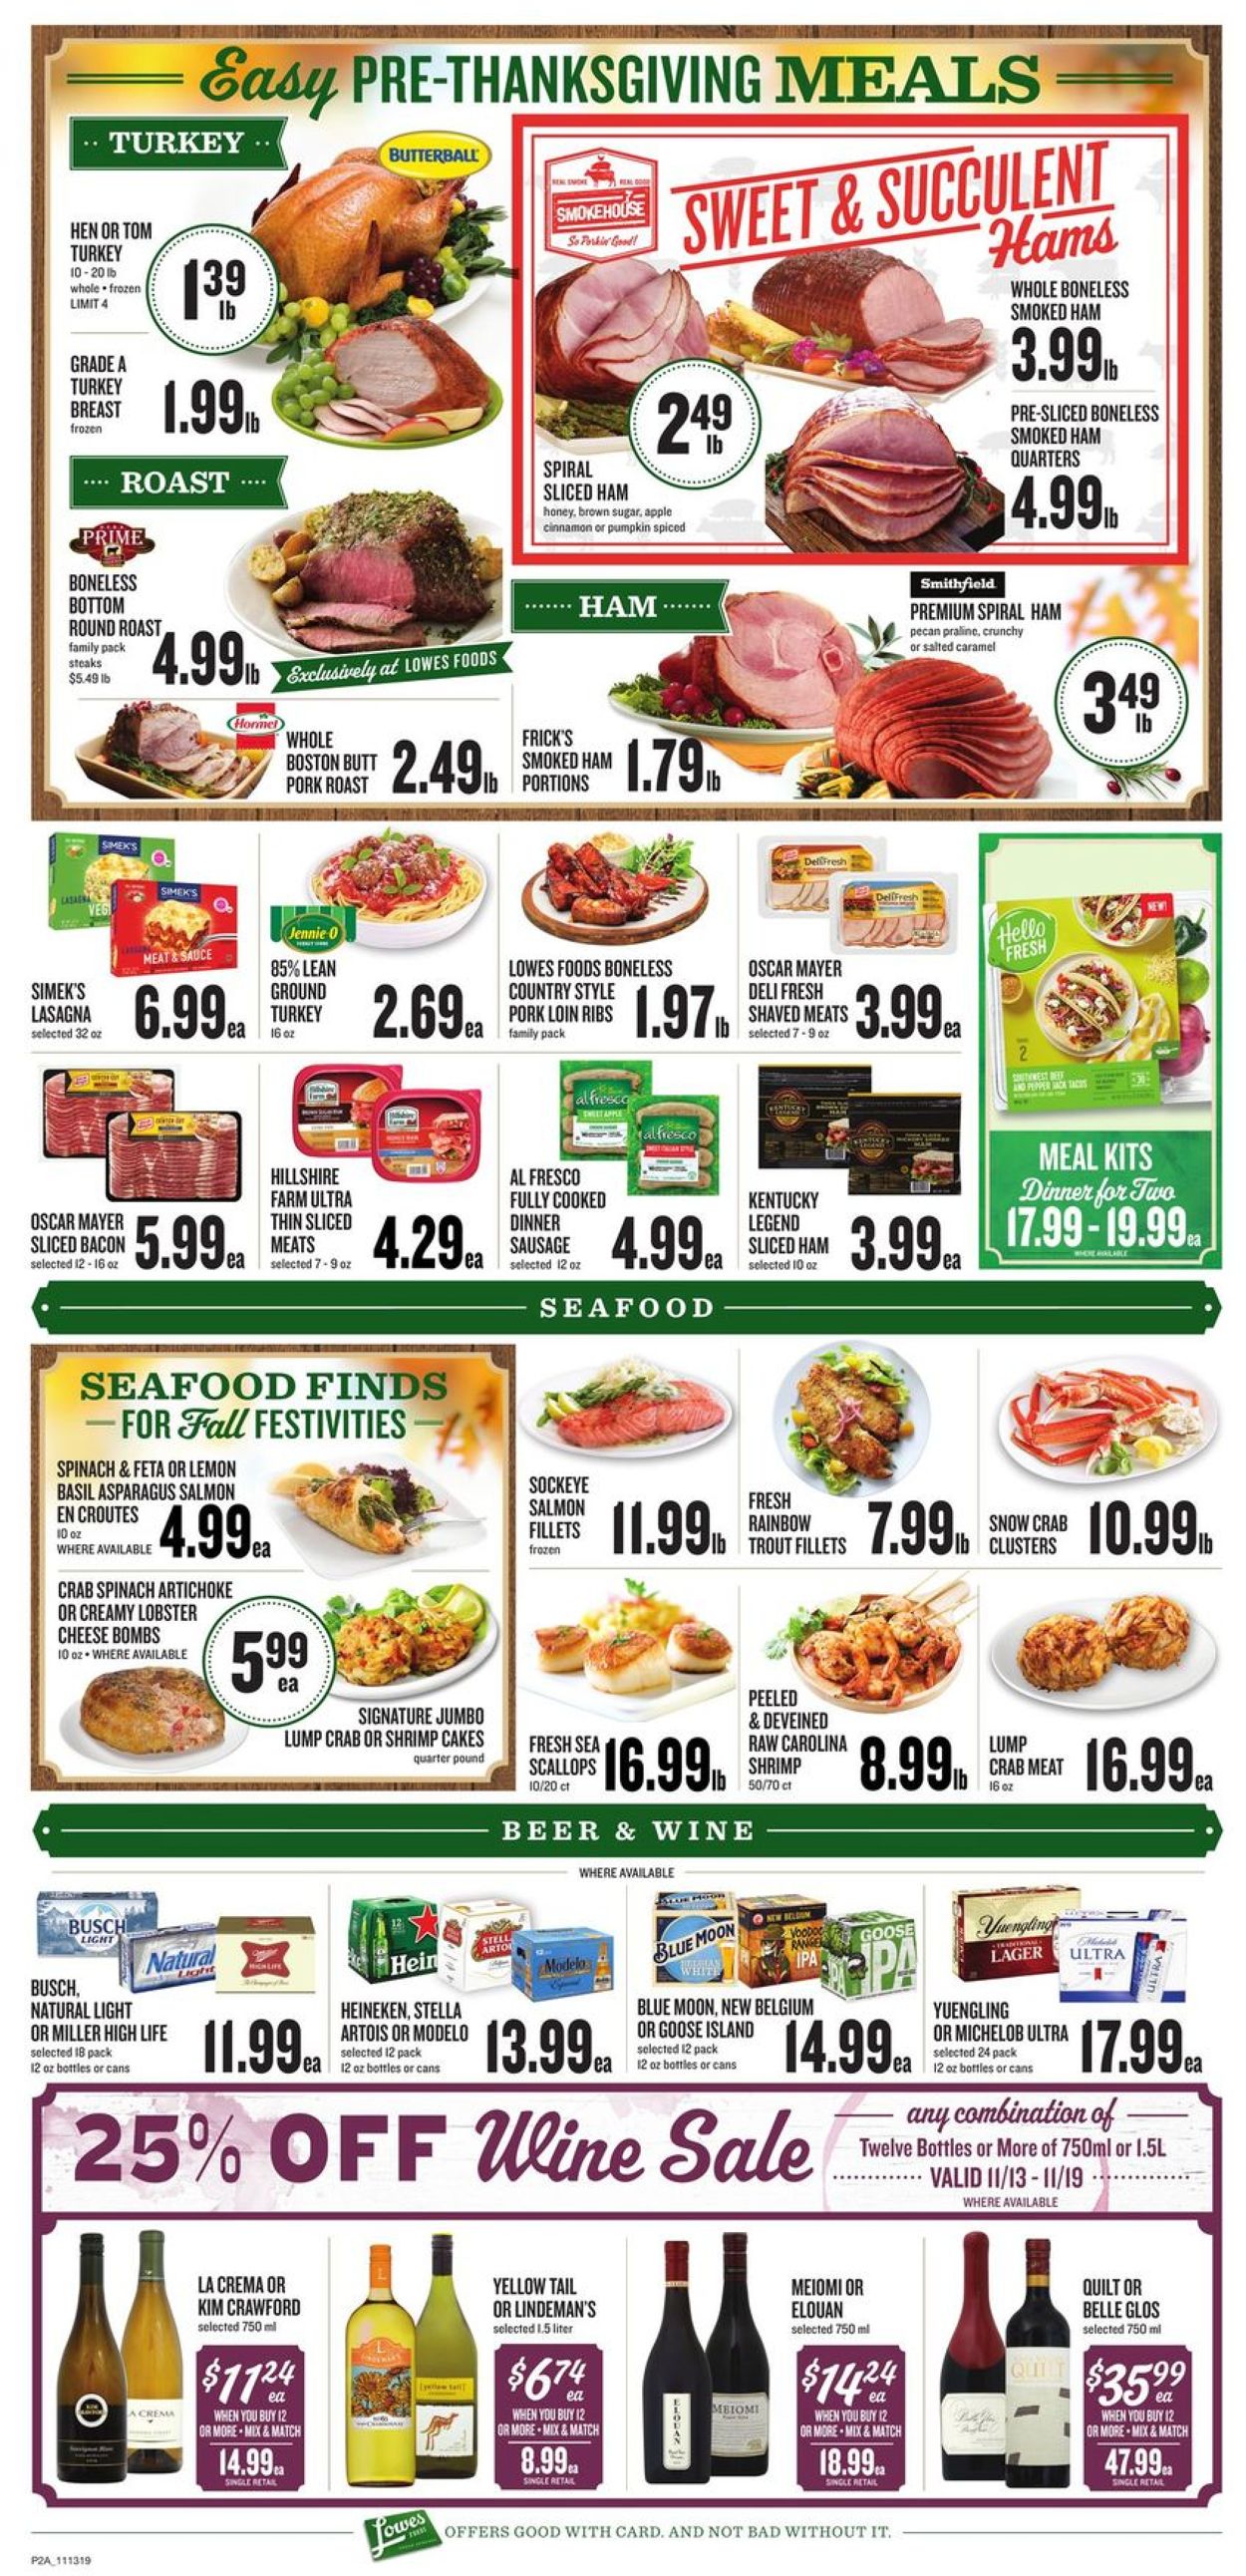 Lowes Foods Holiday Ad 2019 Current weekly ad 11/13 11/19/2019 [3